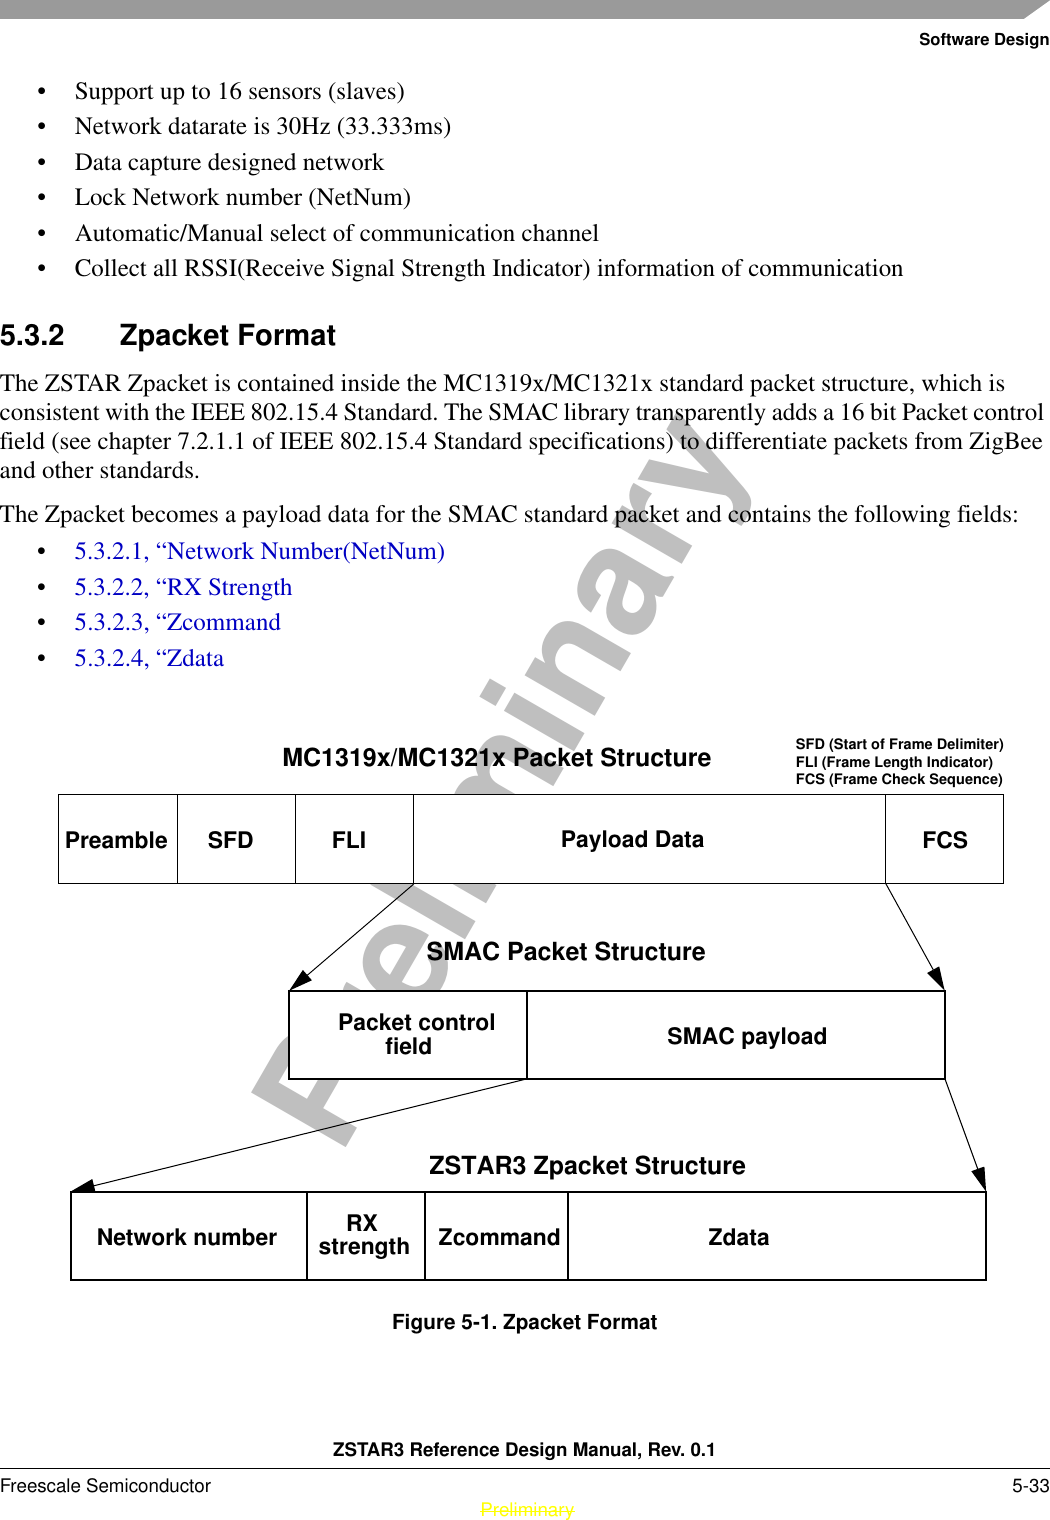 Software DesignZSTAR3 Reference Design Manual, Rev. 0.1Freescale Semiconductor 5-33 PreliminaryPreliminary• Support up to 16 sensors (slaves)• Network datarate is 30Hz (33.333ms)• Data capture designed network• Lock Network number (NetNum)• Automatic/Manual select of communication channel• Collect all RSSI(Receive Signal Strength Indicator) information of communication5.3.2 Zpacket FormatThe ZSTAR Zpacket is contained inside the MC1319x/MC1321x standard packet structure, which is consistent with the IEEE 802.15.4 Standard. The SMAC library transparently adds a 16 bit Packet control field (see chapter 7.2.1.1 of IEEE 802.15.4 Standard specifications) to differentiate packets from ZigBee and other standards.The Zpacket becomes a payload data for the SMAC standard packet and contains the following fields:•5.3.2.1, “Network Number(NetNum)•5.3.2.2, “RX Strength•5.3.2.3, “Zcommand•5.3.2.4, “ZdataFigure 5-1. Zpacket FormatPreamble SFD FLI Payload Data FCSMC1319x/MC1321x Packet Structure SFD (Start of Frame Delimiter)FLI (Frame Length Indicator)FCS (Frame Check Sequence)Network number RXstrength Zcommand ZdataZSTAR3 Zpacket StructurePacket control SMAC payloadSMAC Packet Structurefield